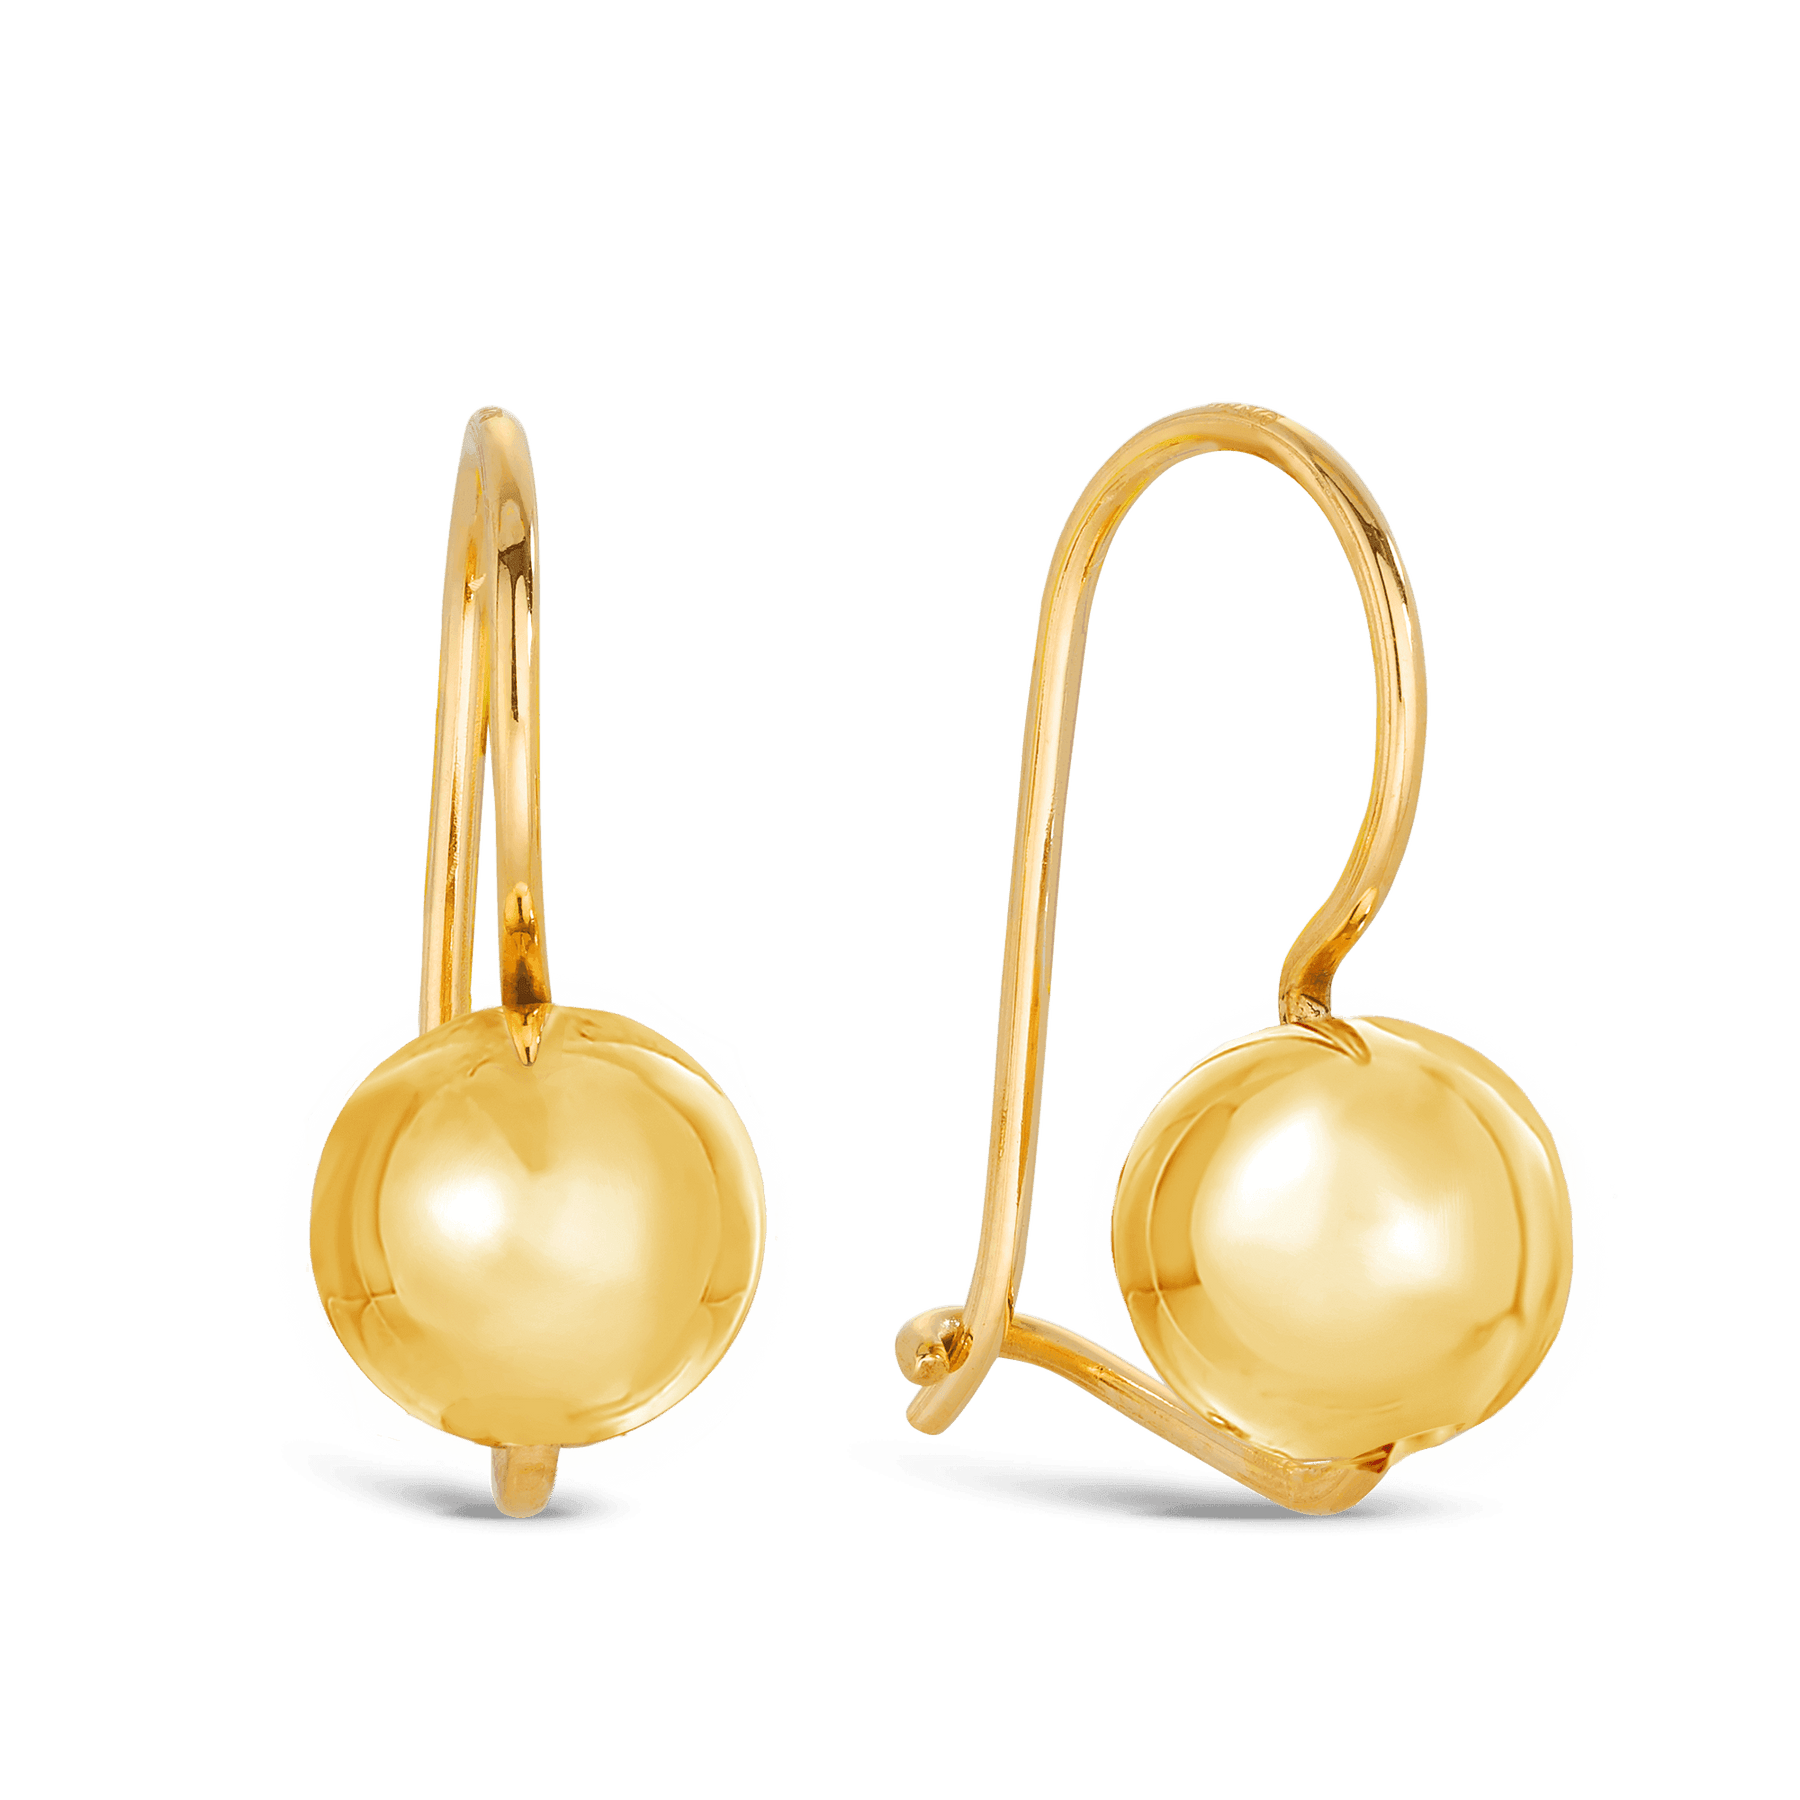 8mm Round Euroball Earrings in 9ct Yellow Gold - Wallace Bishop